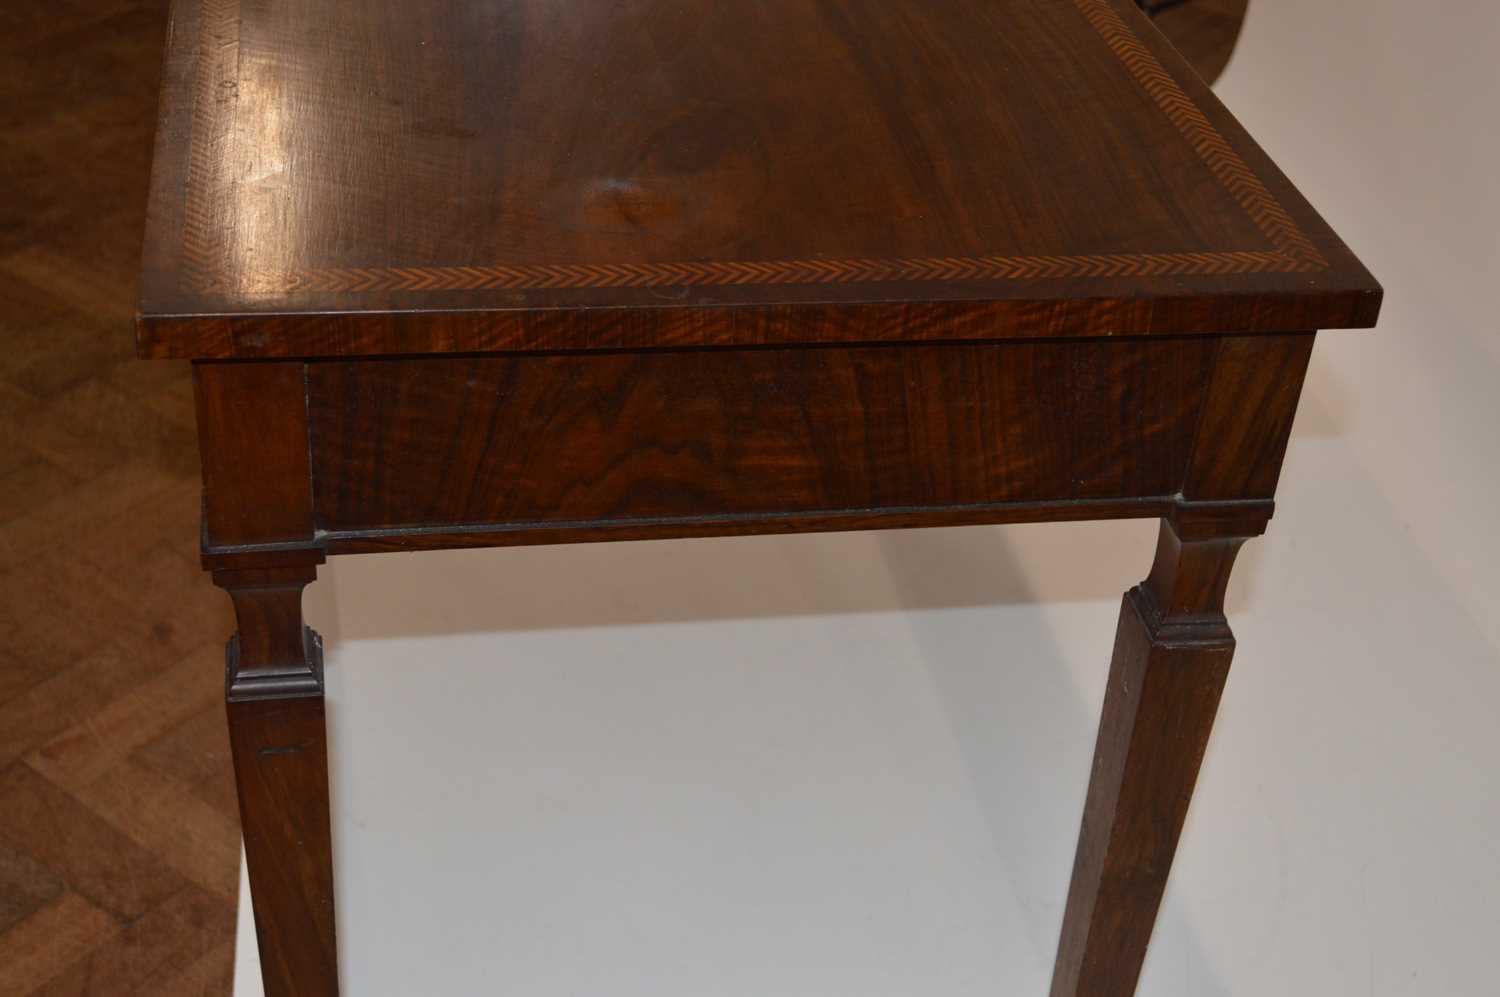 Edwardian Walnut Side Table with Parquetry Border - Image 7 of 7